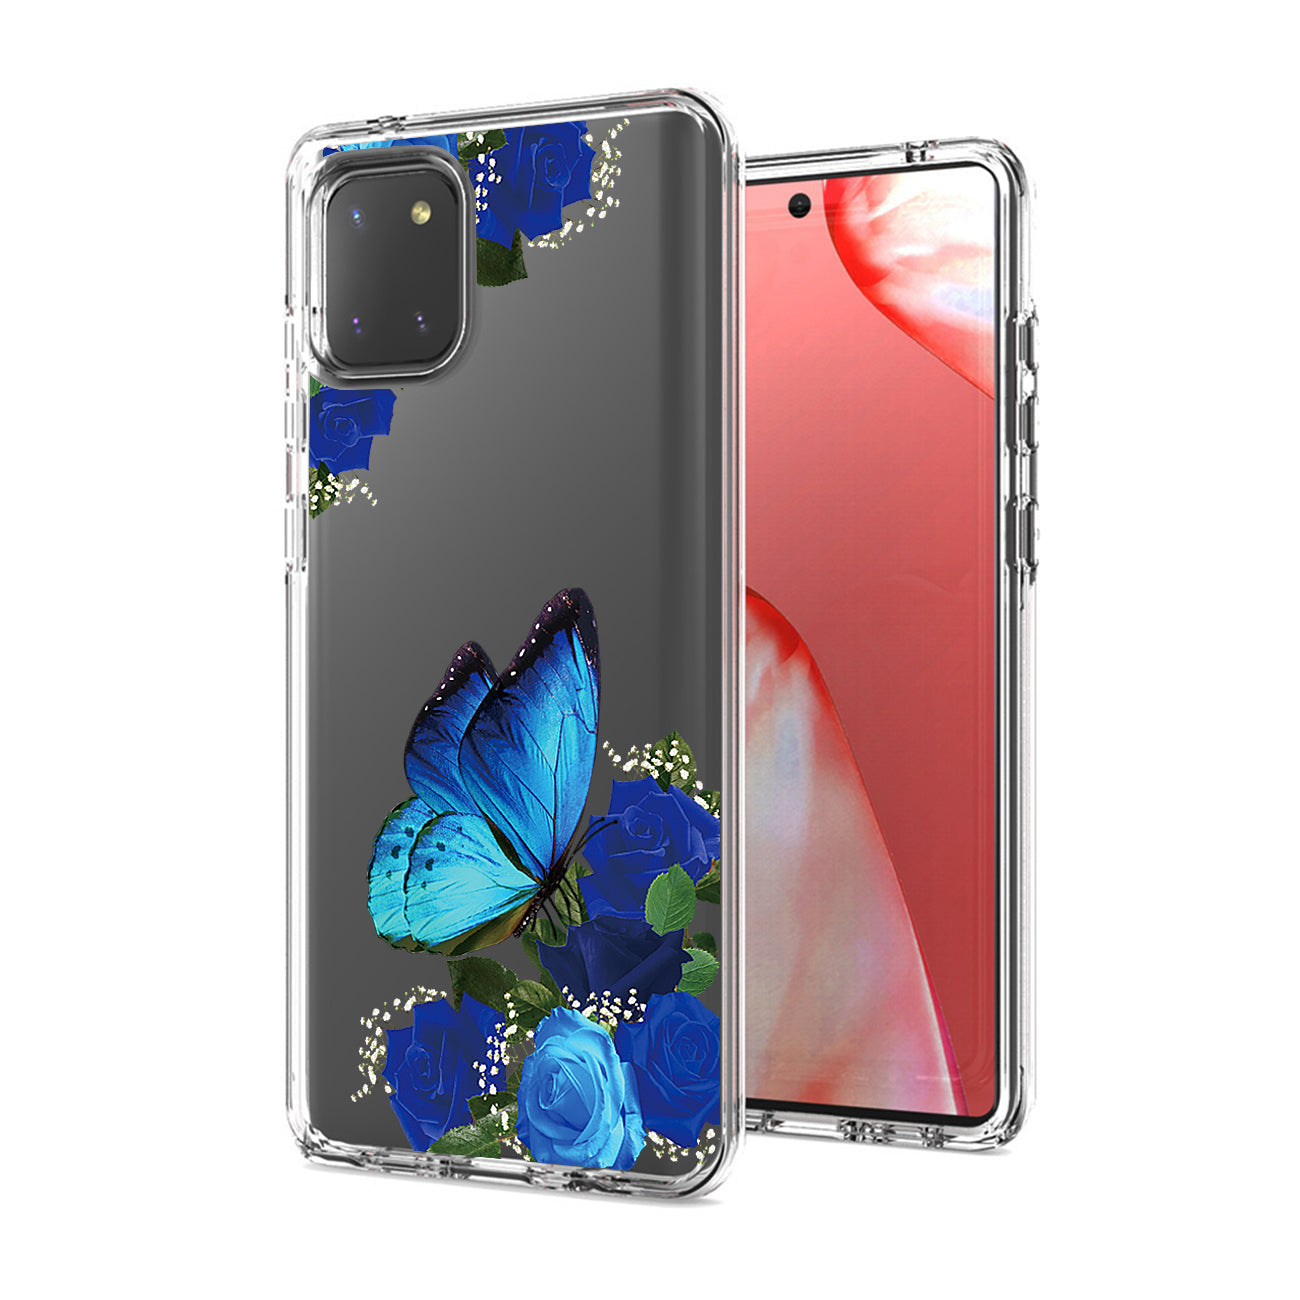 Pressed dried flower Design Phone case for SAMSUNG GALAXY A81/Note 10 Lite/M60S In Blue